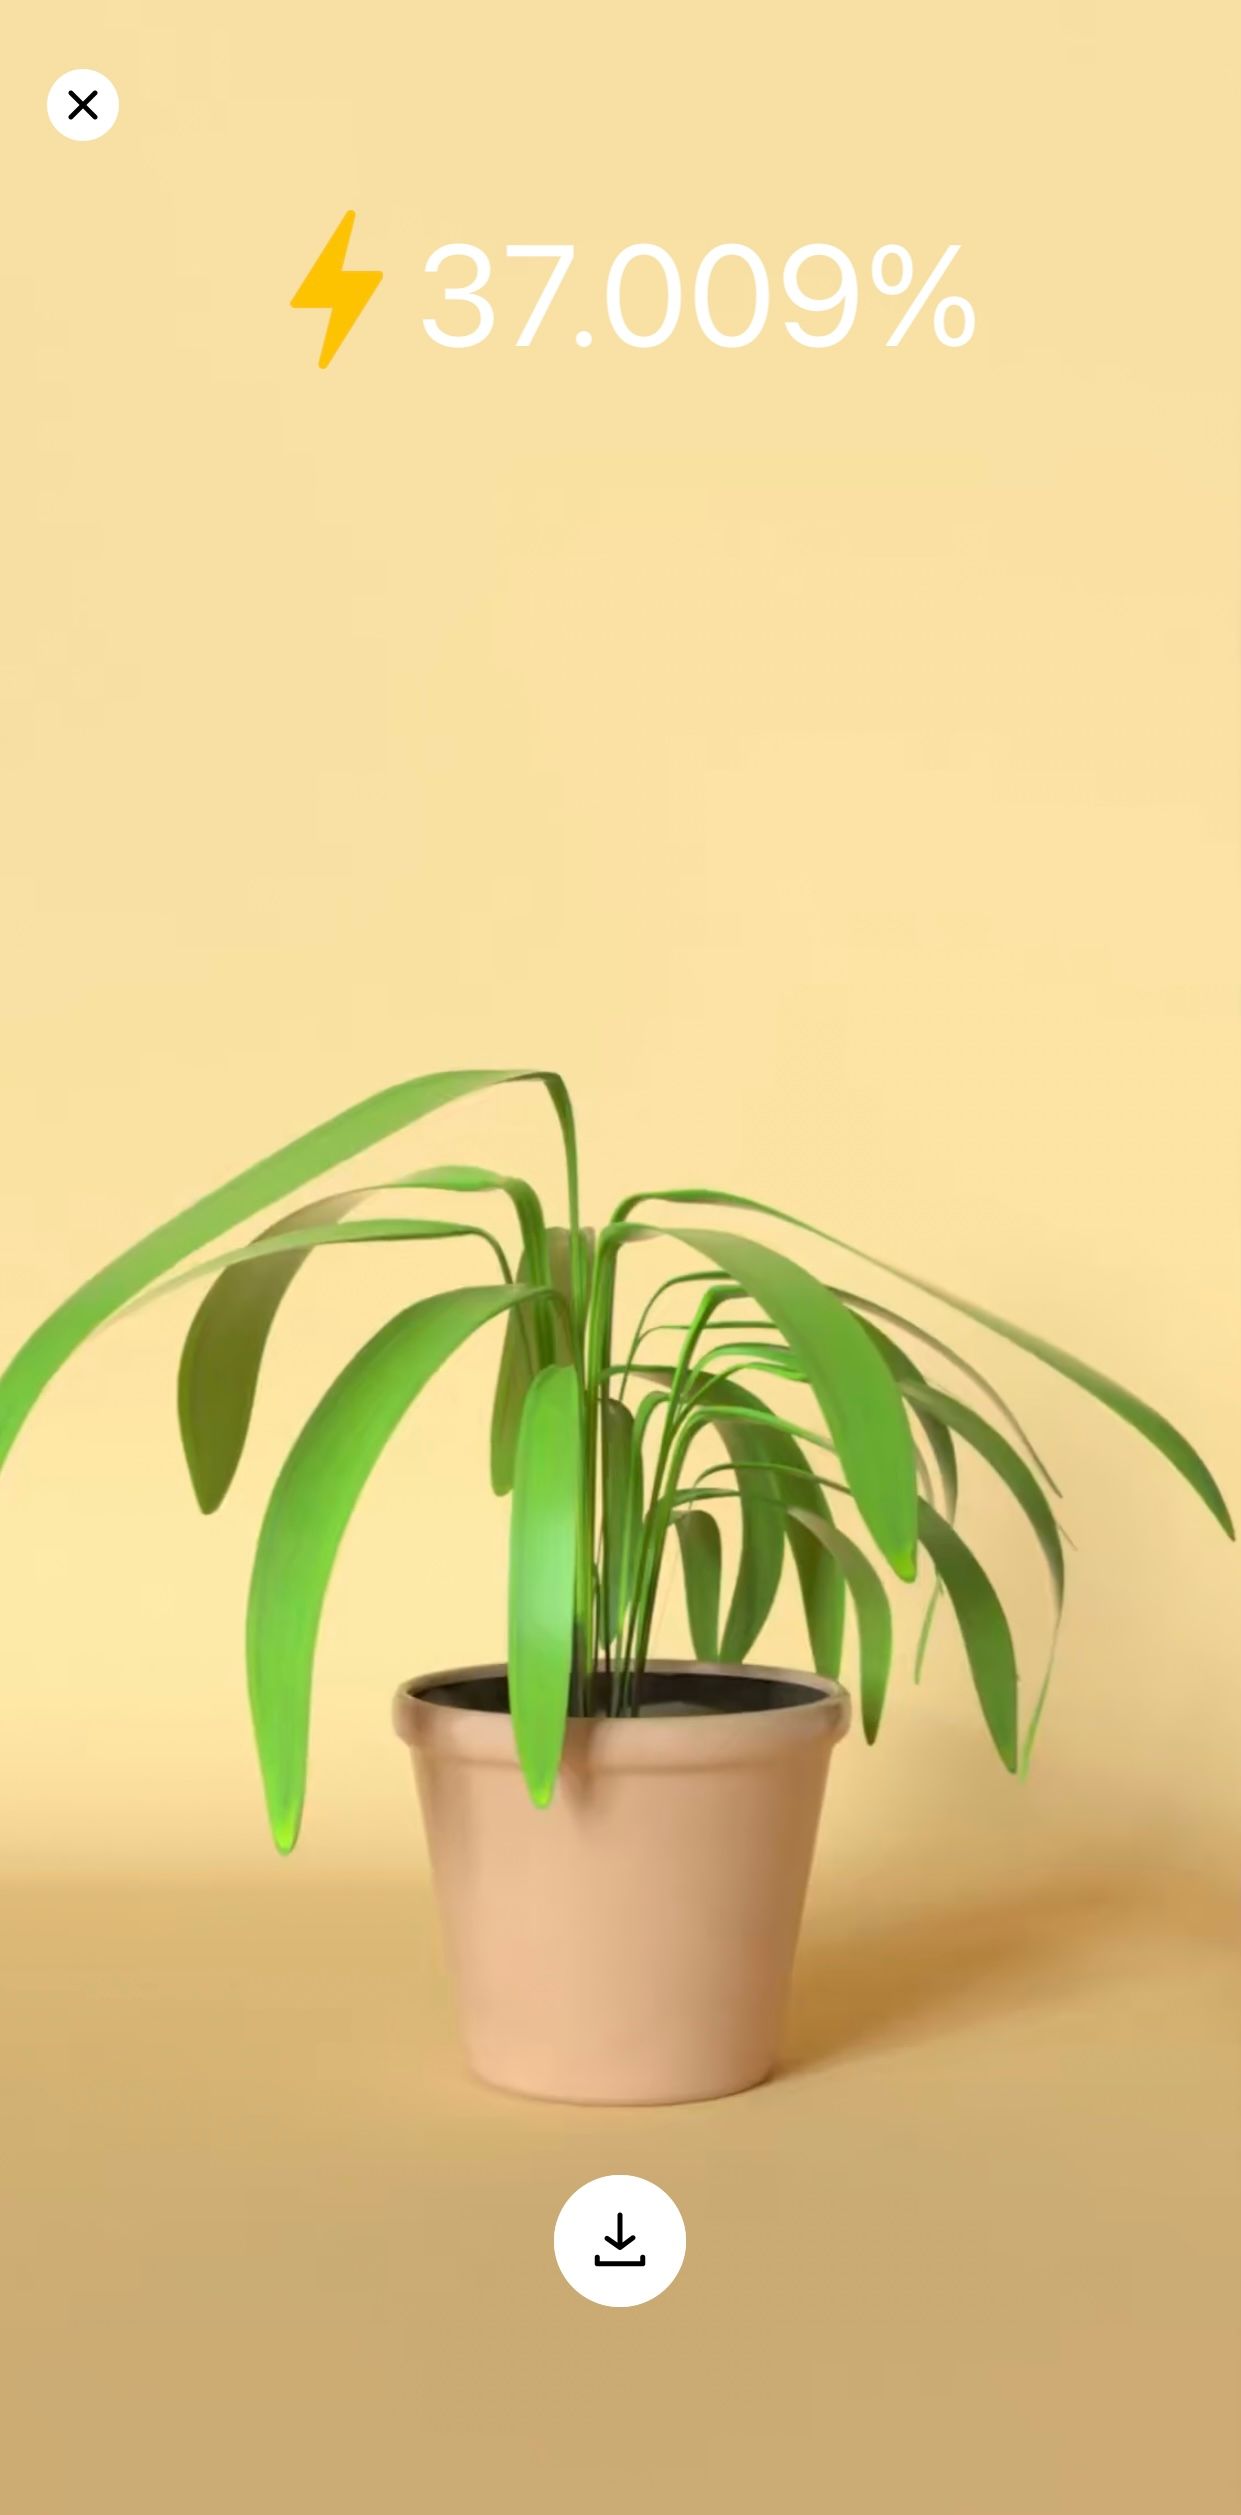 iPhone charging animation of flacid green potted plant against yellow-beige wall